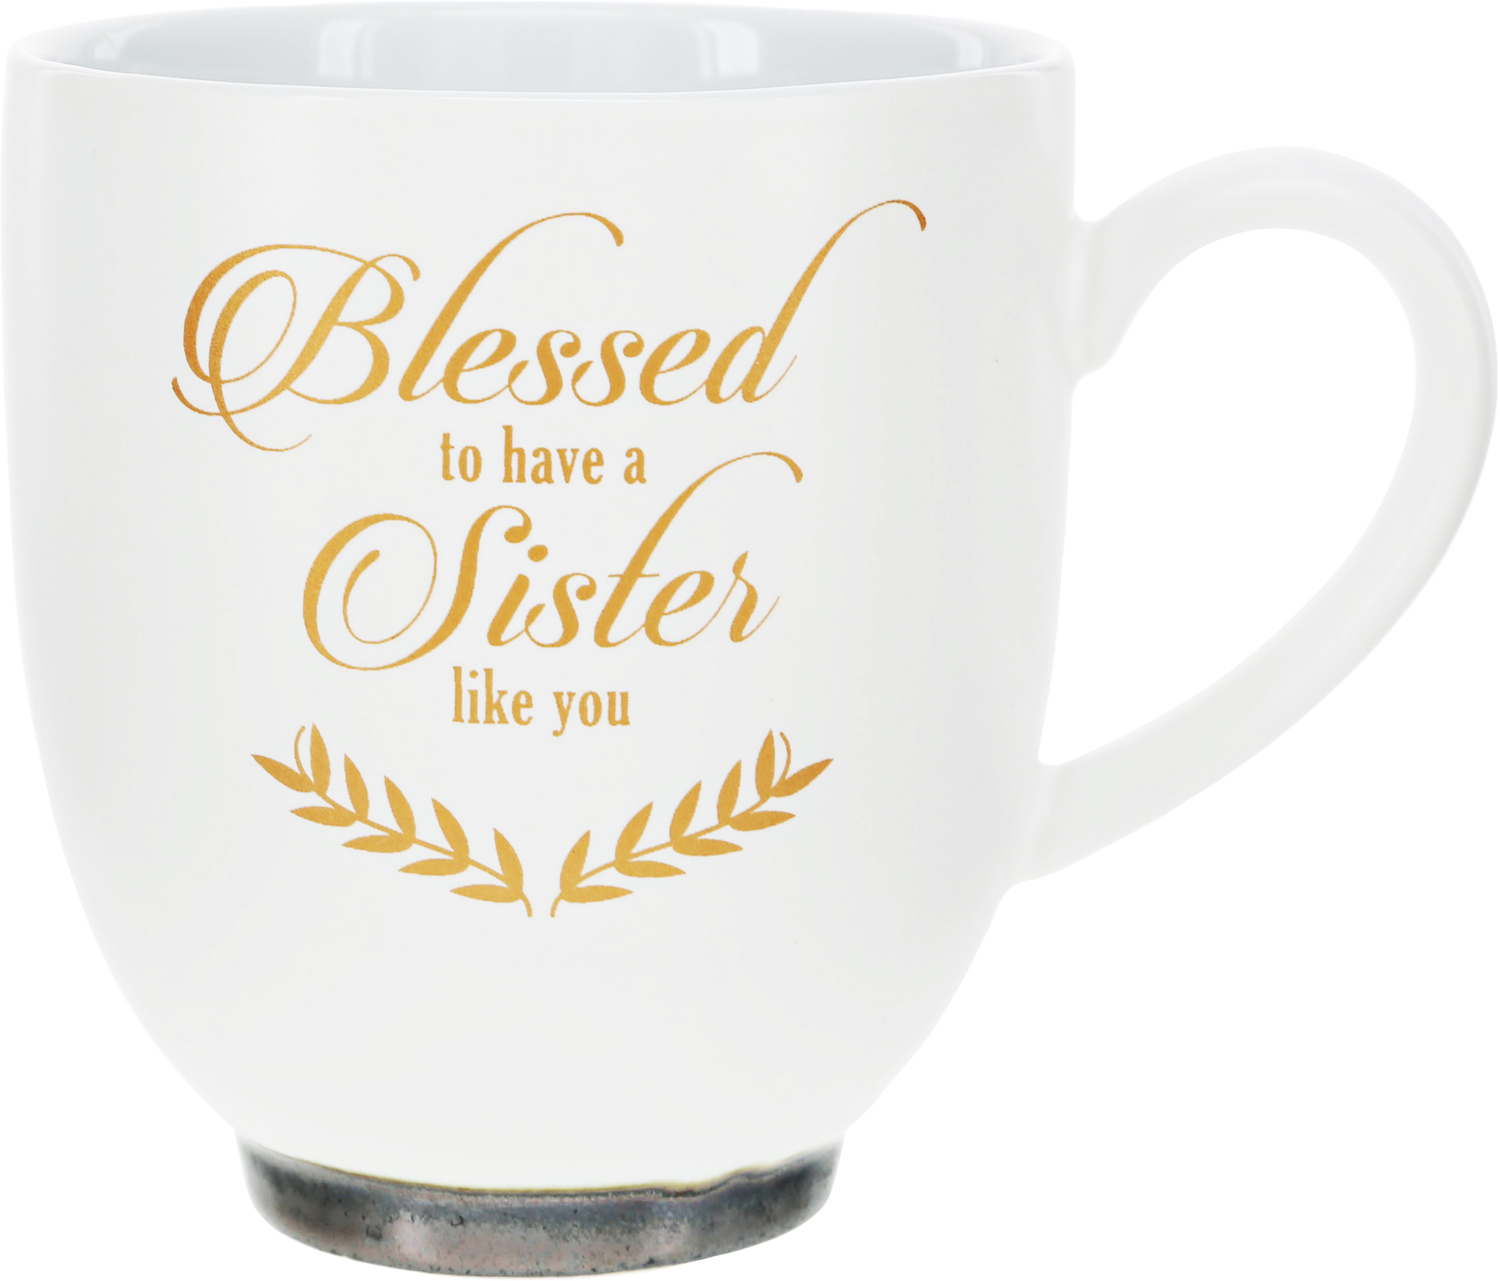 Sister by Blessed by You - Sister - 15.5 oz Cup